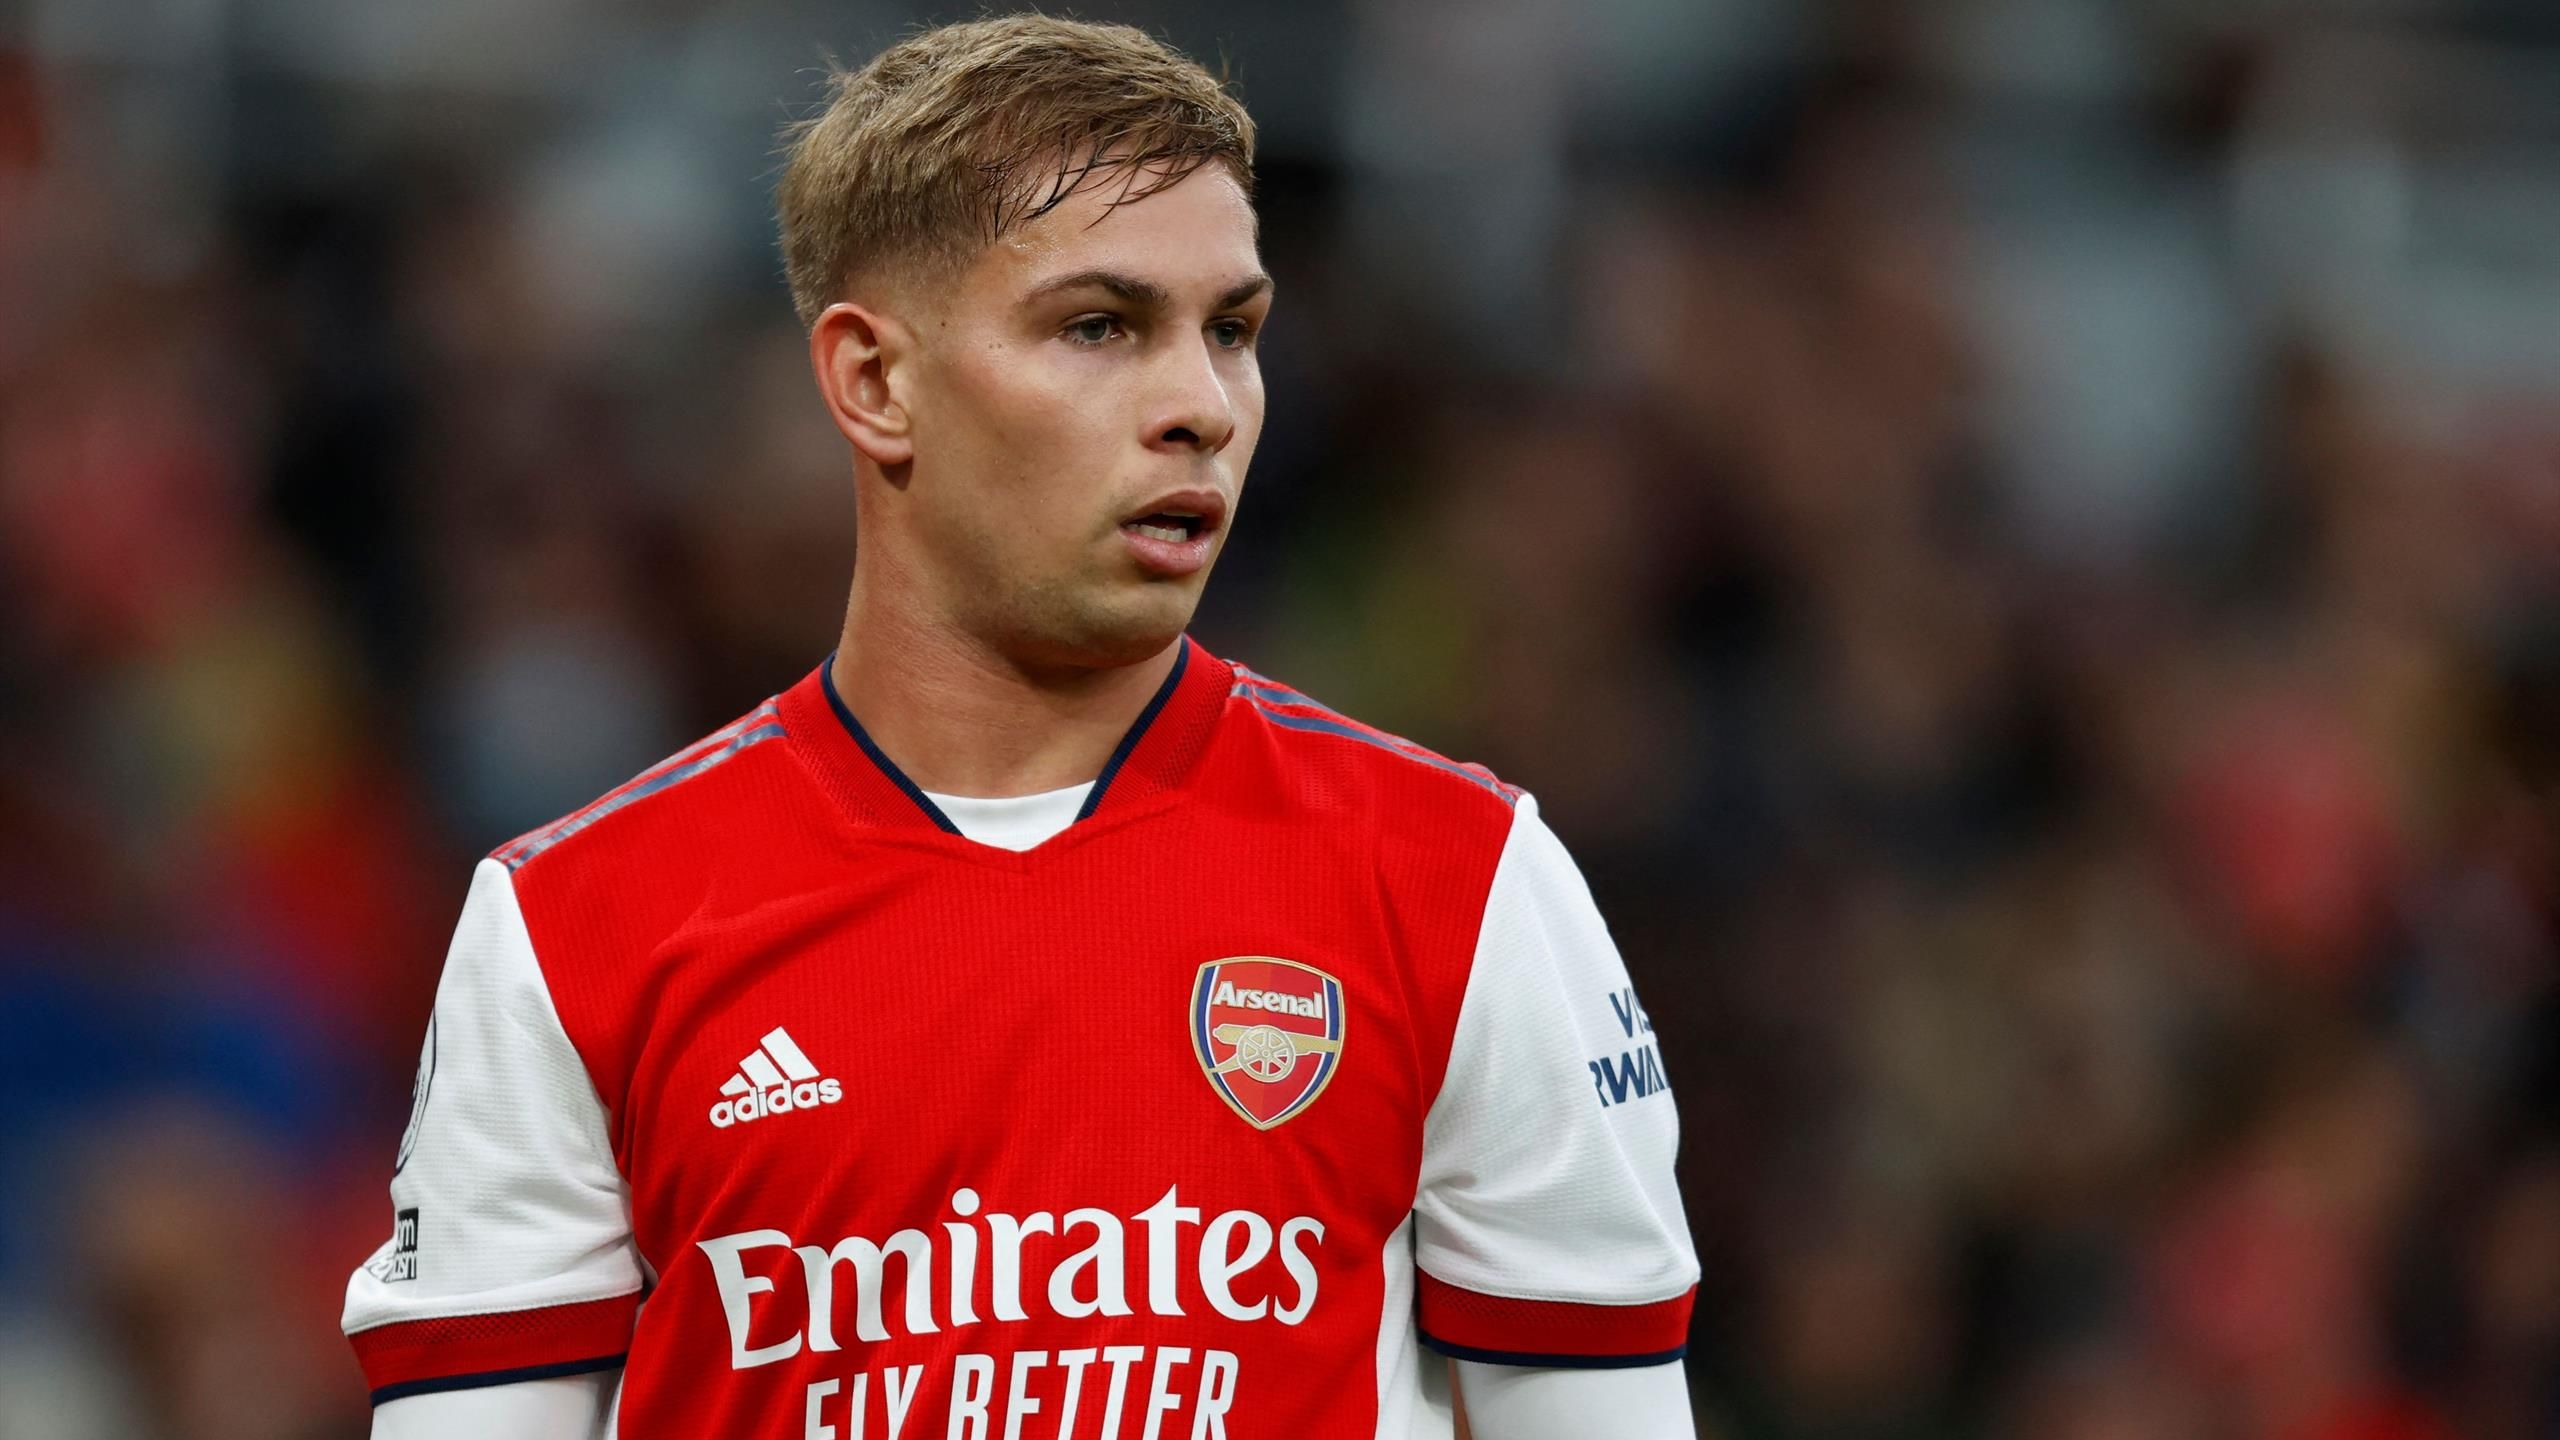 Arsenal 2 Brentford 1 Emile Smith Rowe grabs winner as Arsenal beat Brentford to close gap on top four